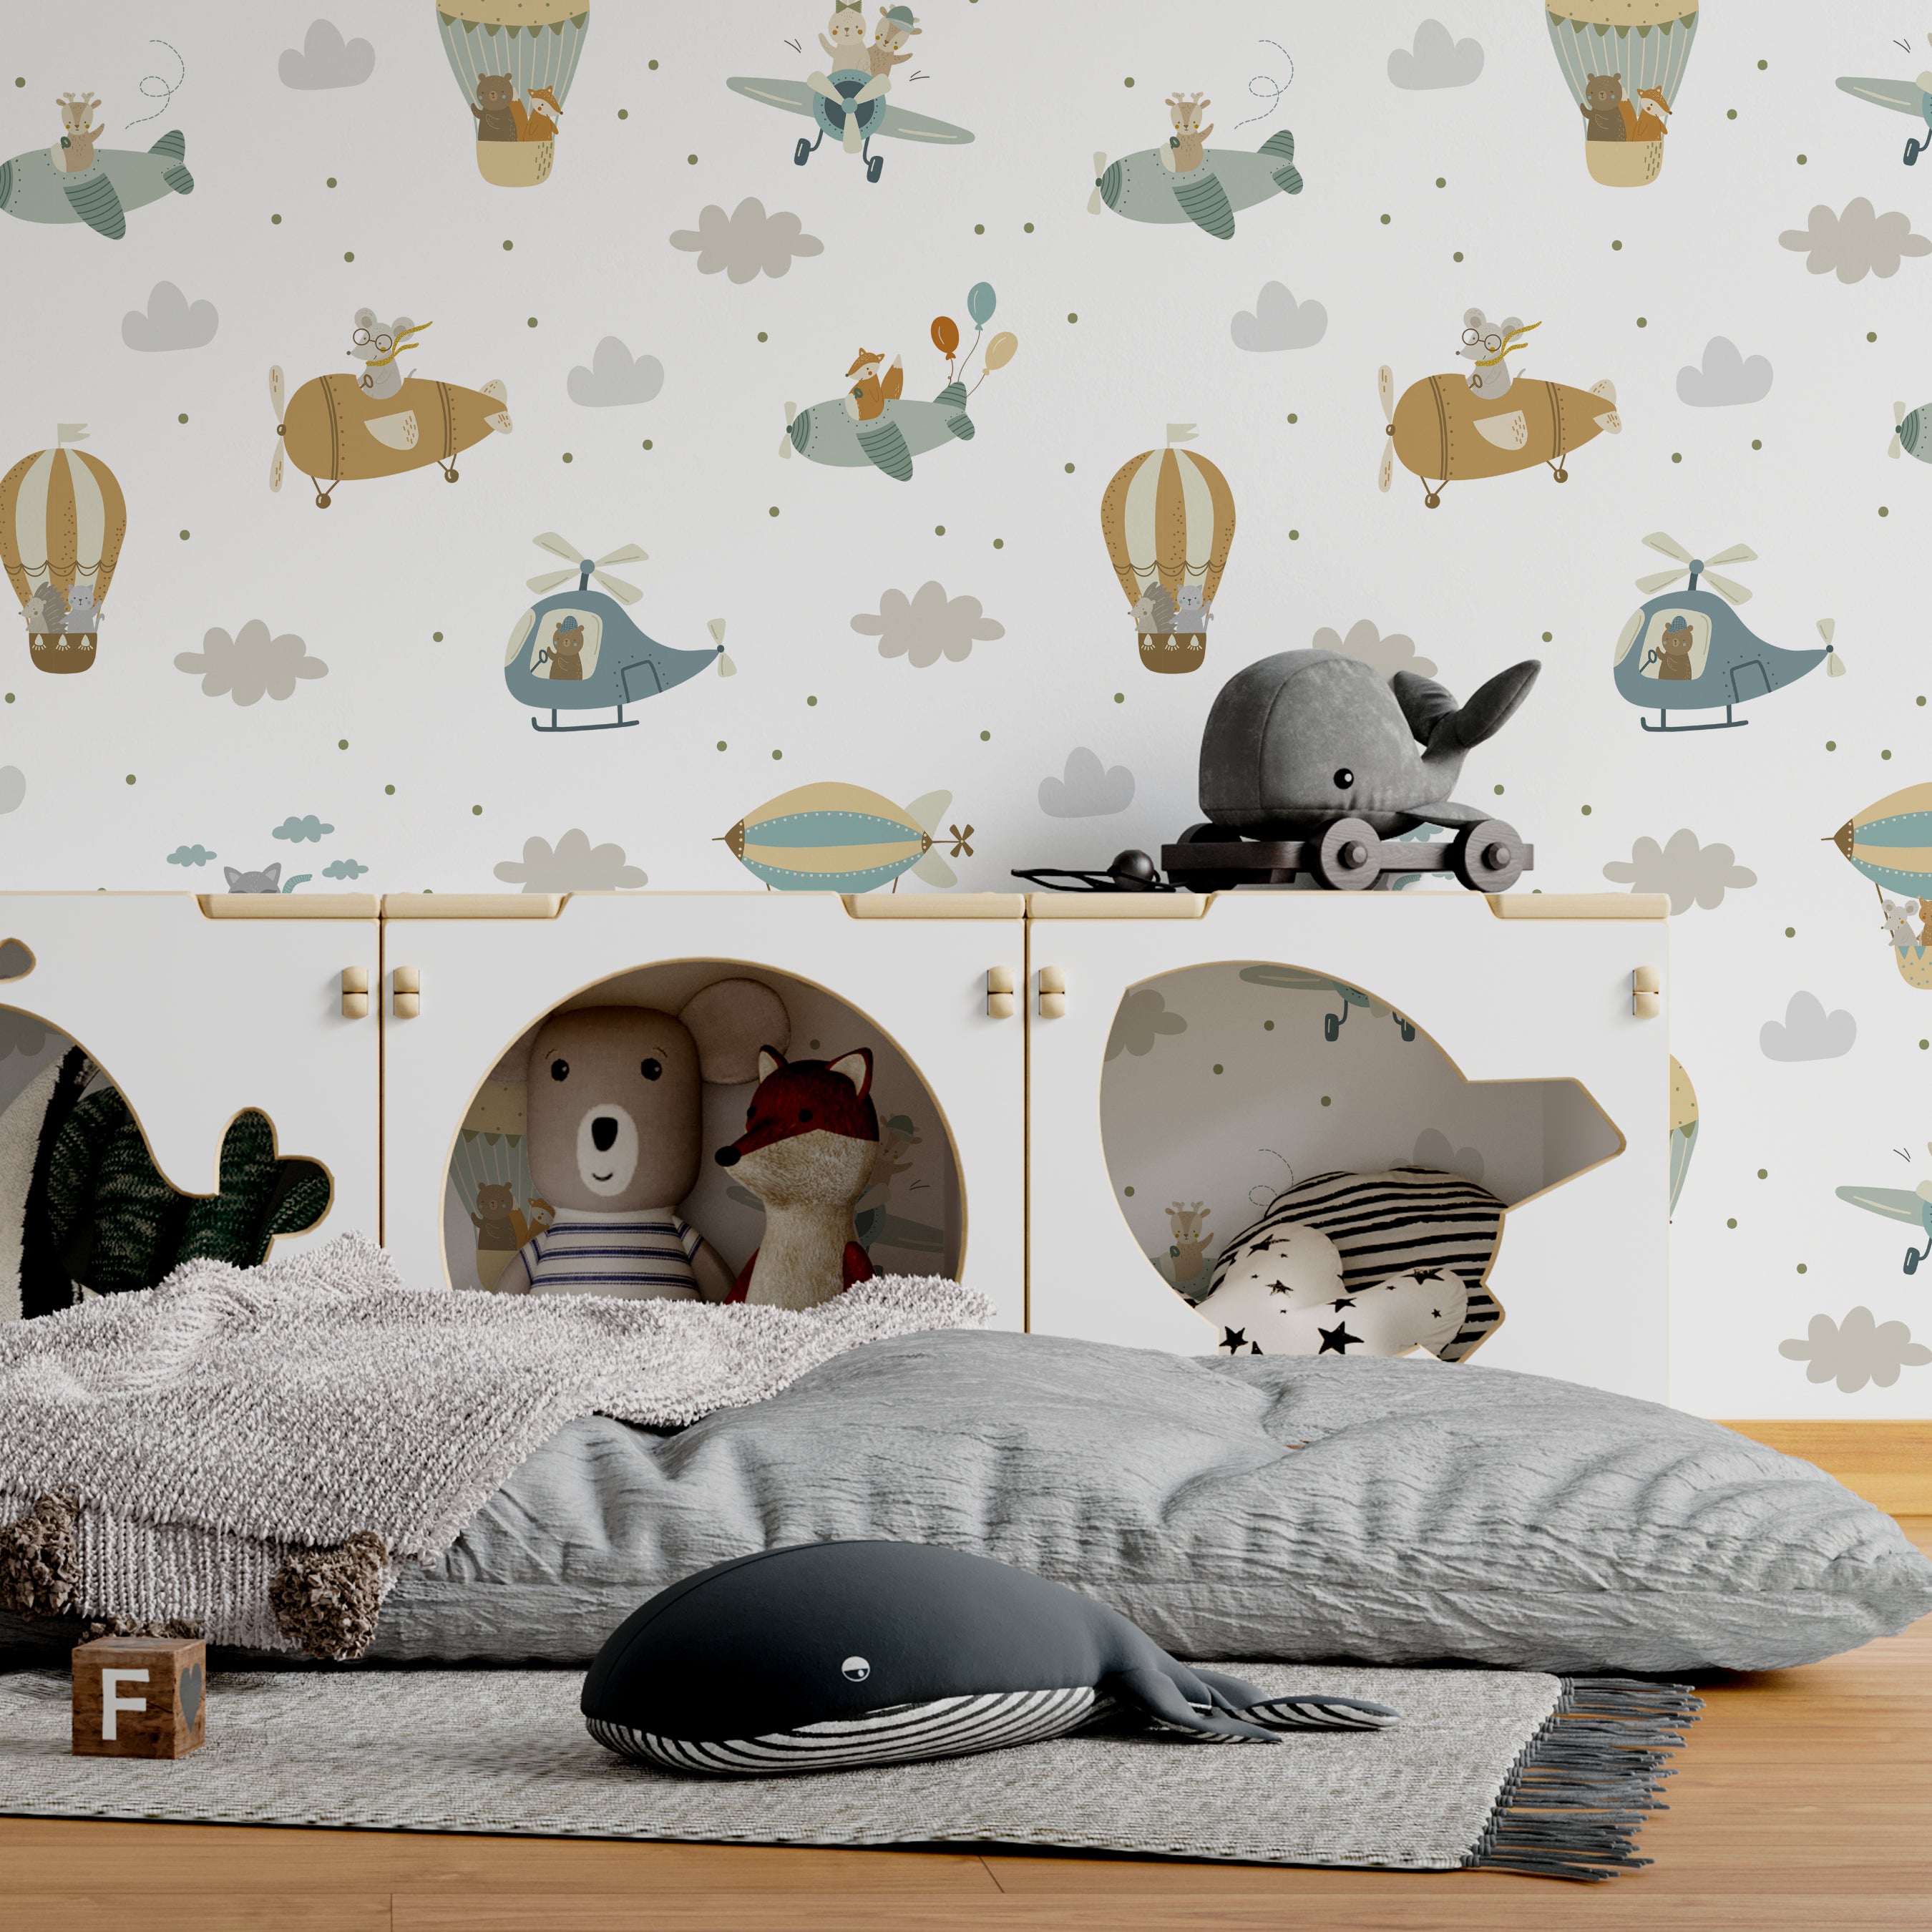 Children's room with 'Flying Friends' wallpaper depicting playful animals piloting air vehicles. A whimsically decorated space features stuffed toys on a two-tiered open cabinet, plush cushions on a bed with grey bedding, and a decorative whale pillow, complementing the adventurous theme of the wallpaper.